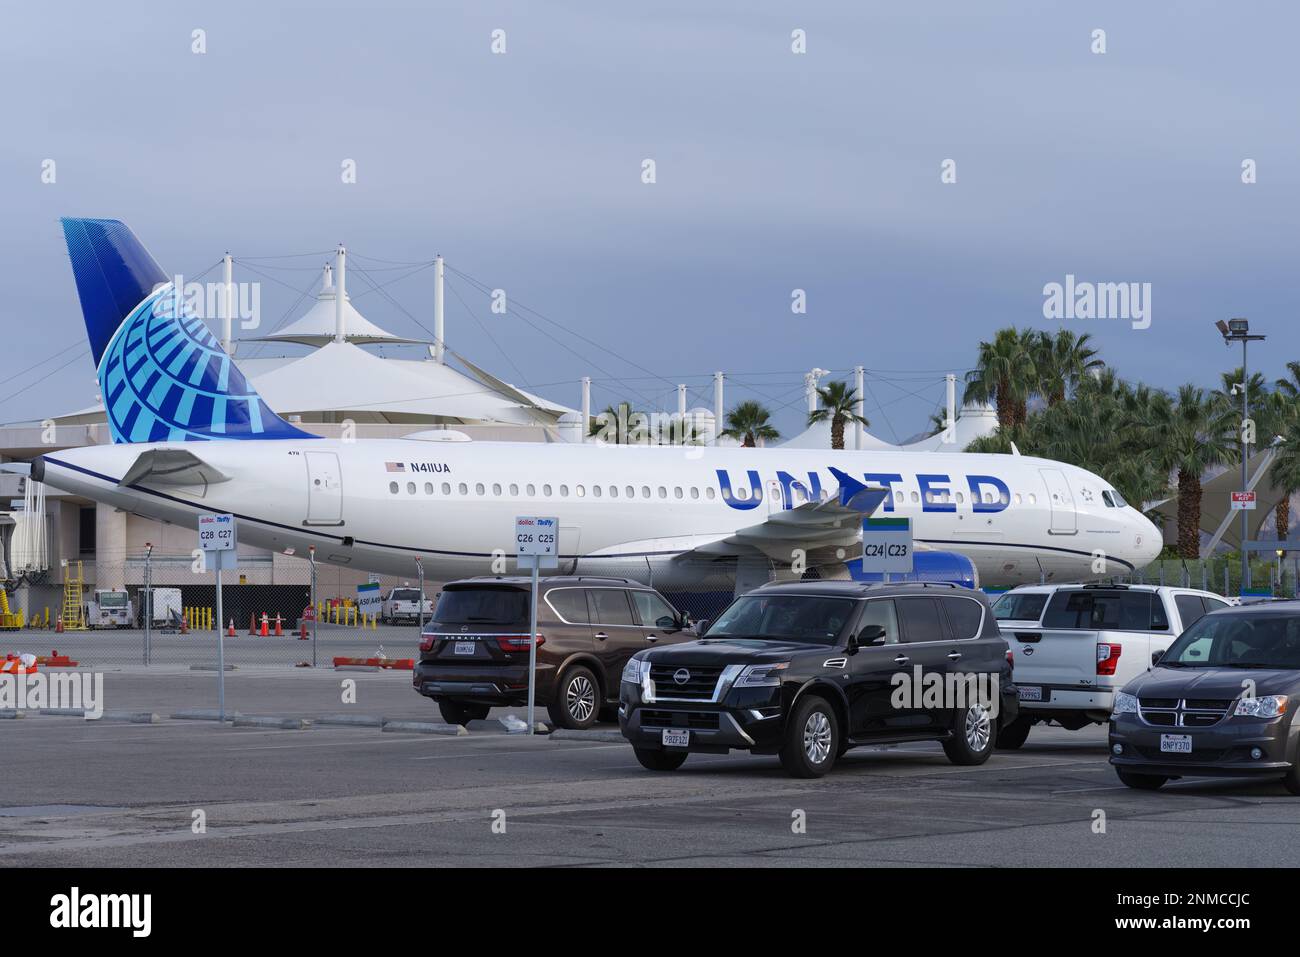 Palm Springs International Airport, California. United Airlines Airbus A320-232 aircraft with registration N411UA and rental vehicles shown parked. Stock Photo